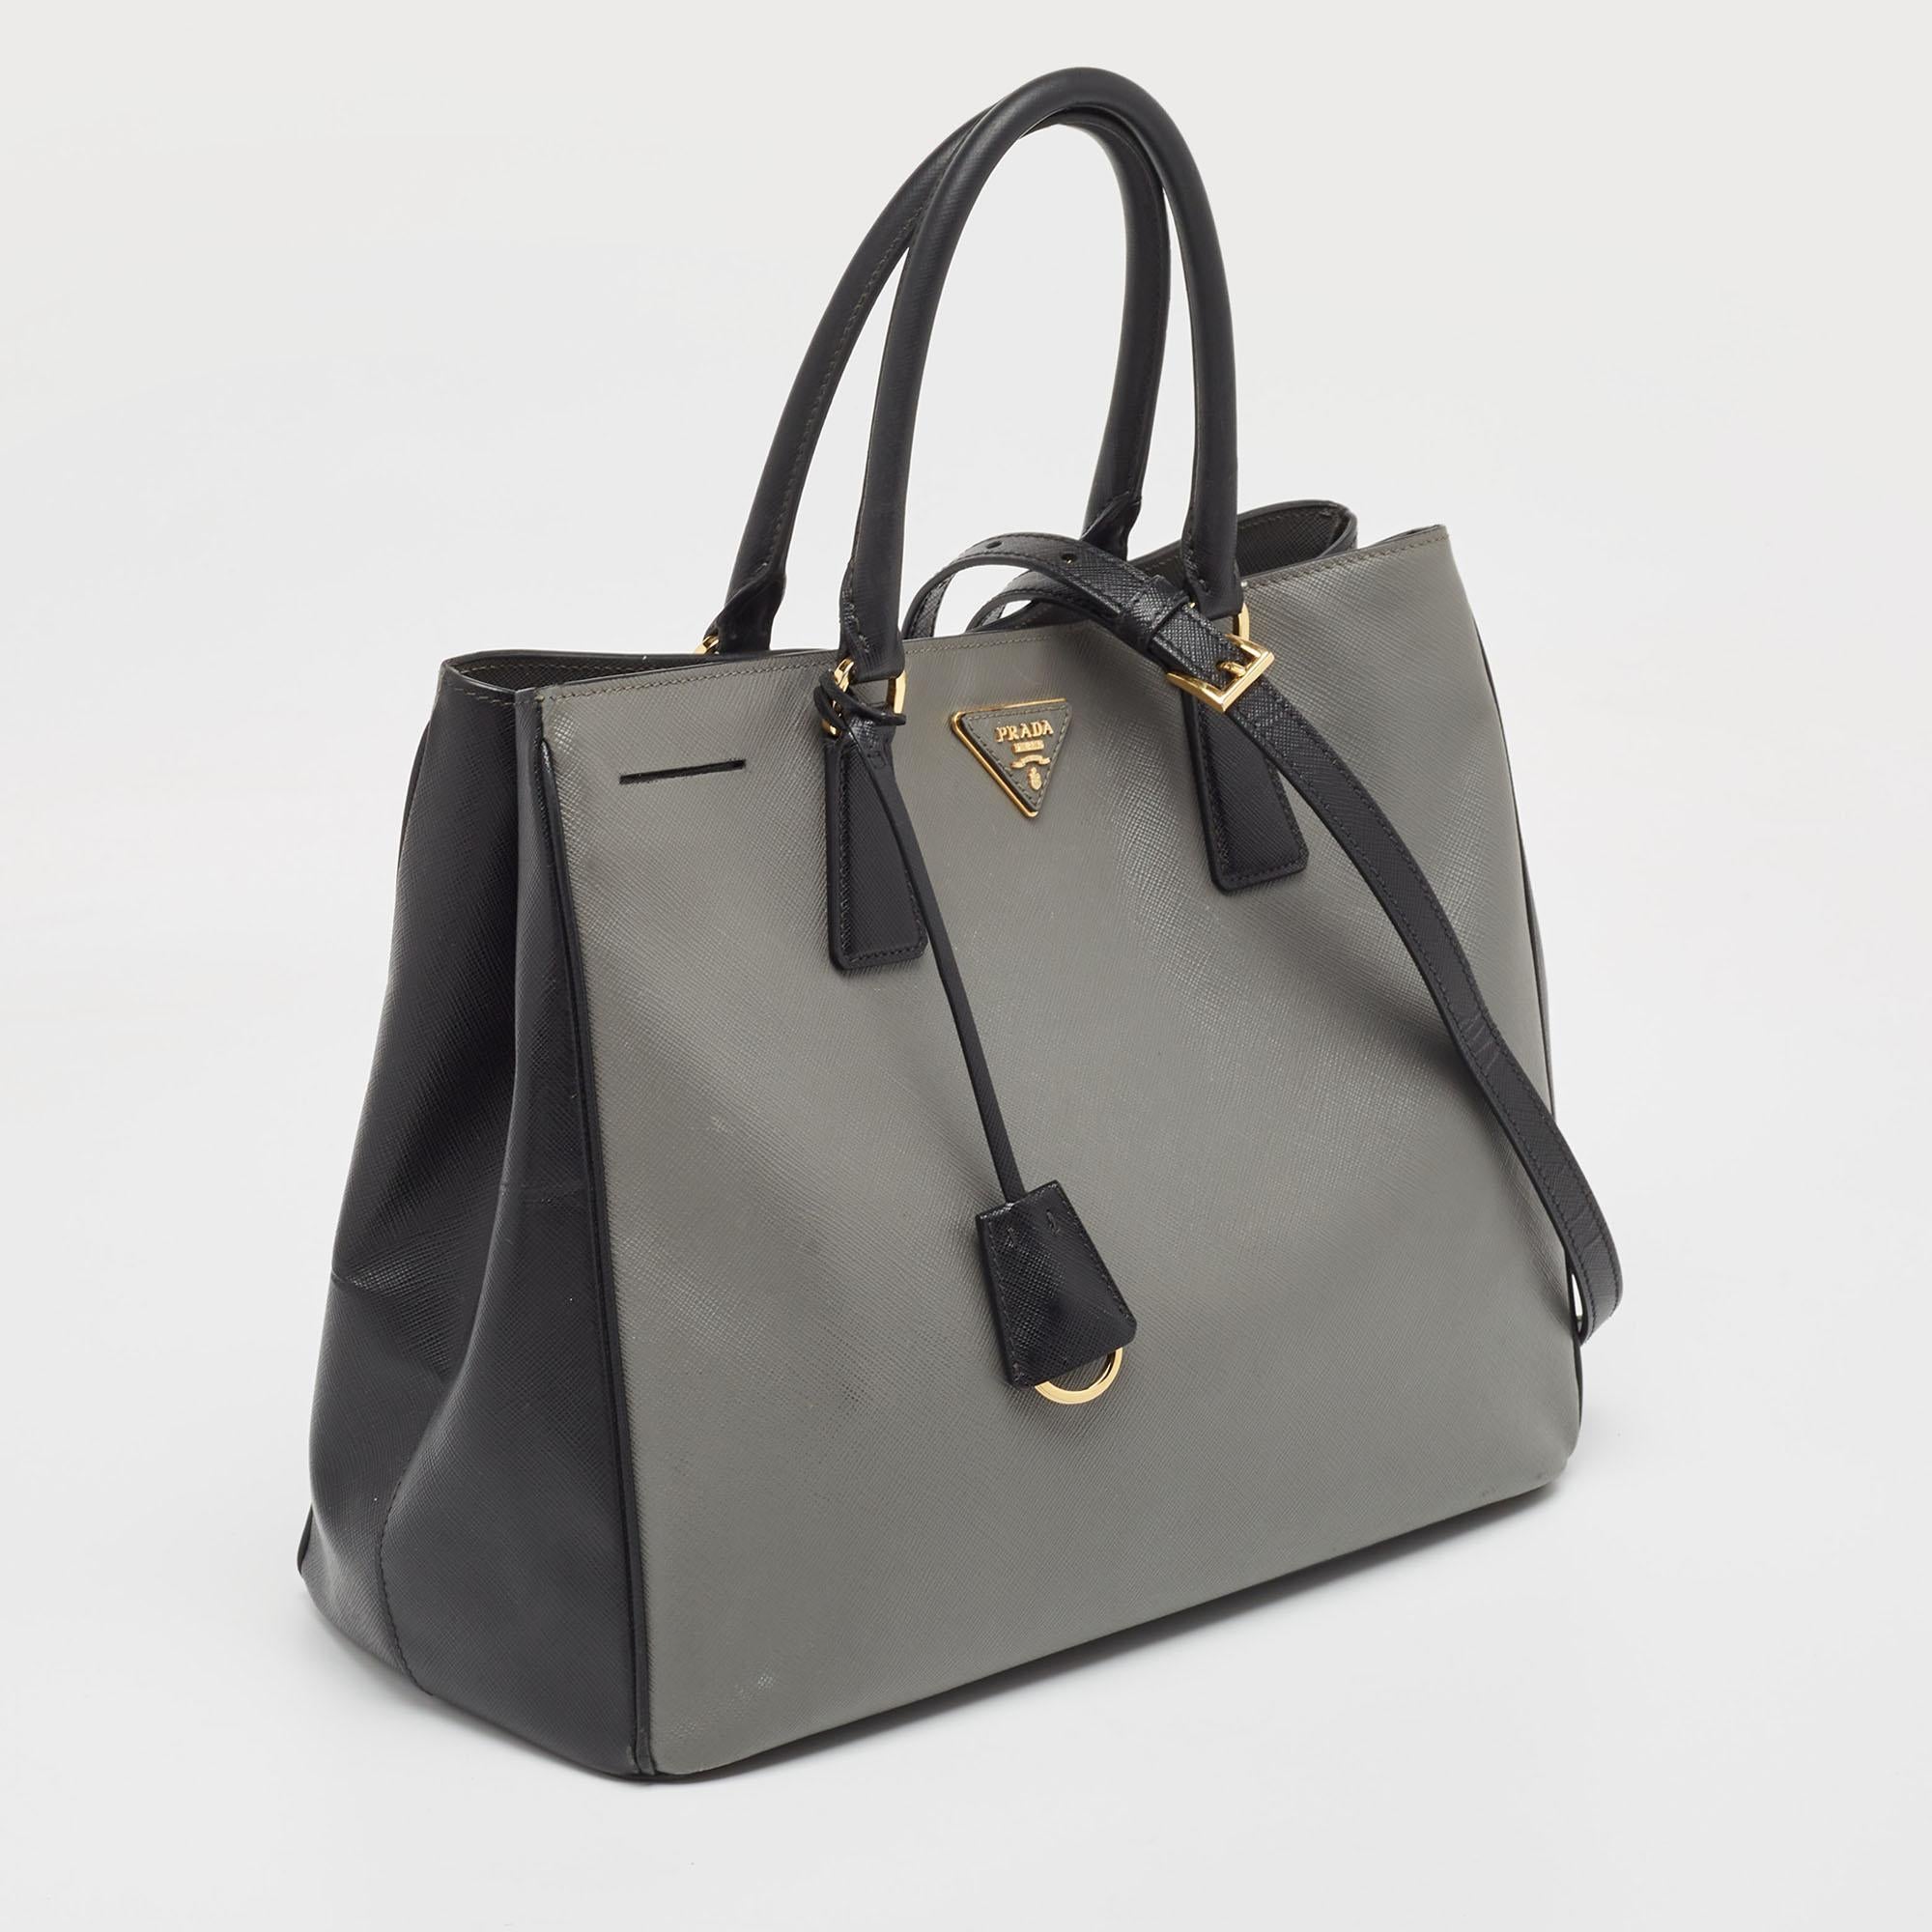 The architectural shape of this Prada tote makes it distinct and fashionable. Made from premium materials, it can be carried around conveniently and it is equipped with a perfectly-sized interior.

